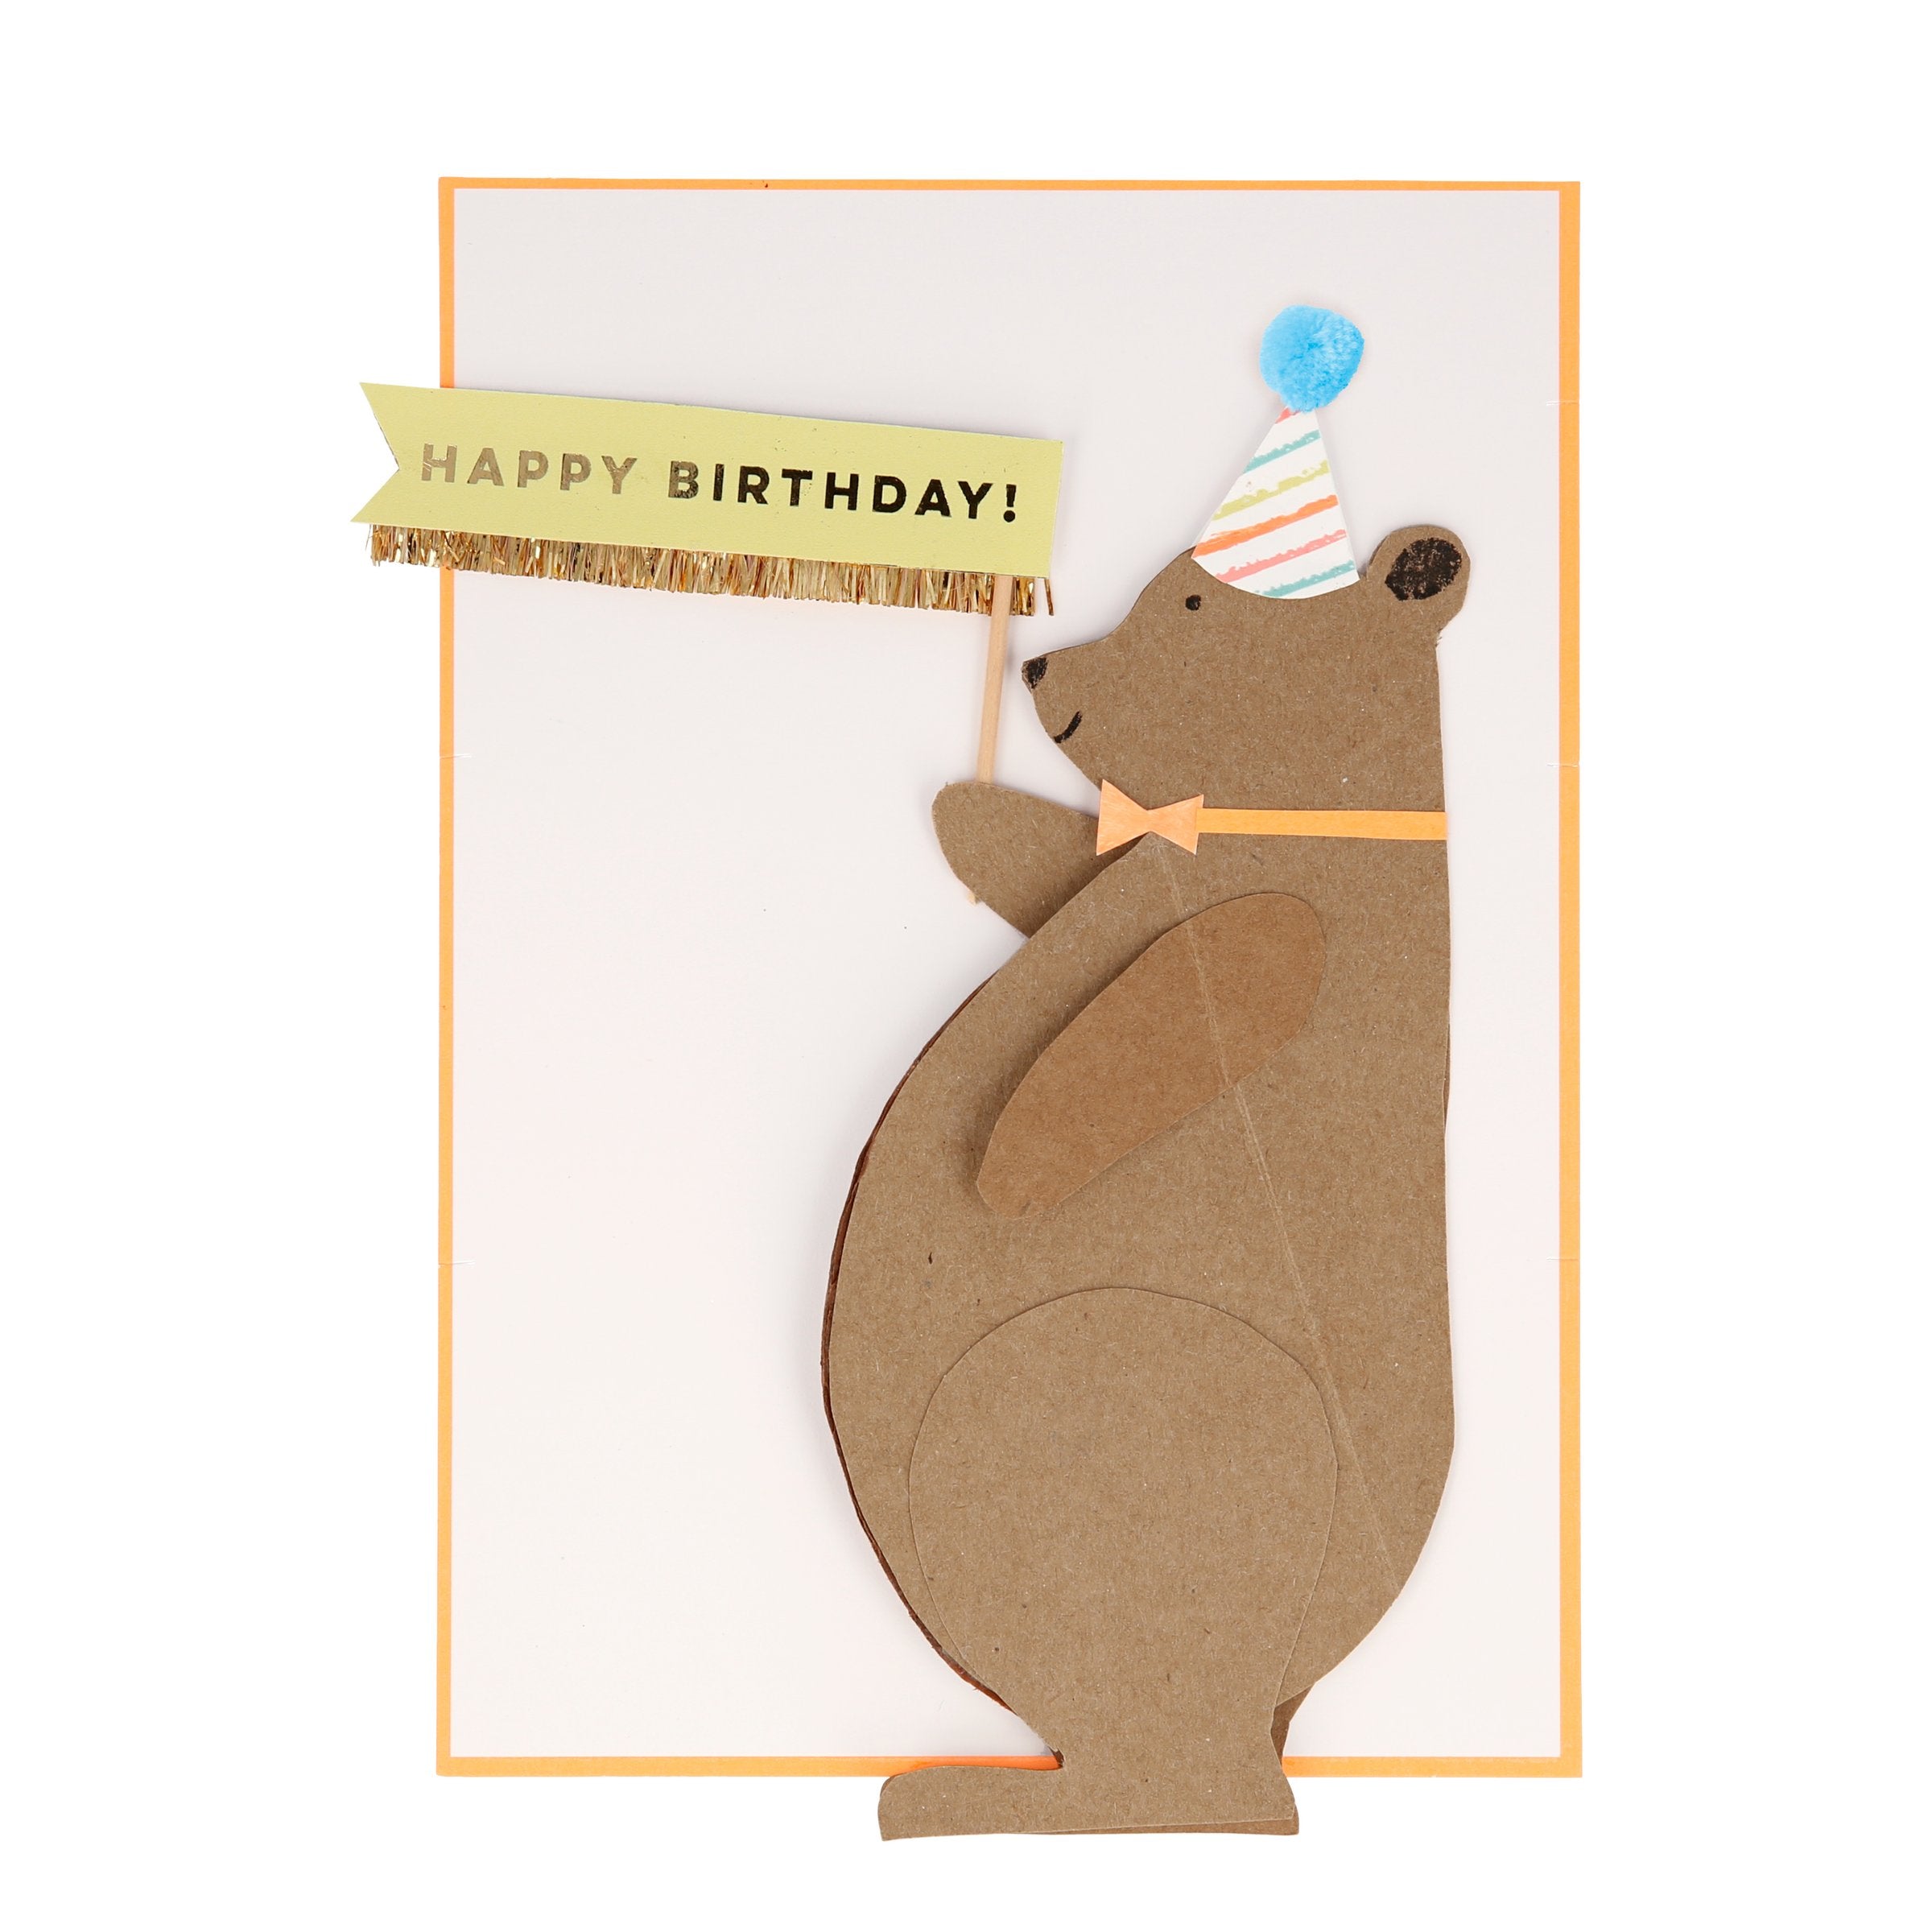 Our embellished bear card is the perfect birthday card for a special friend.